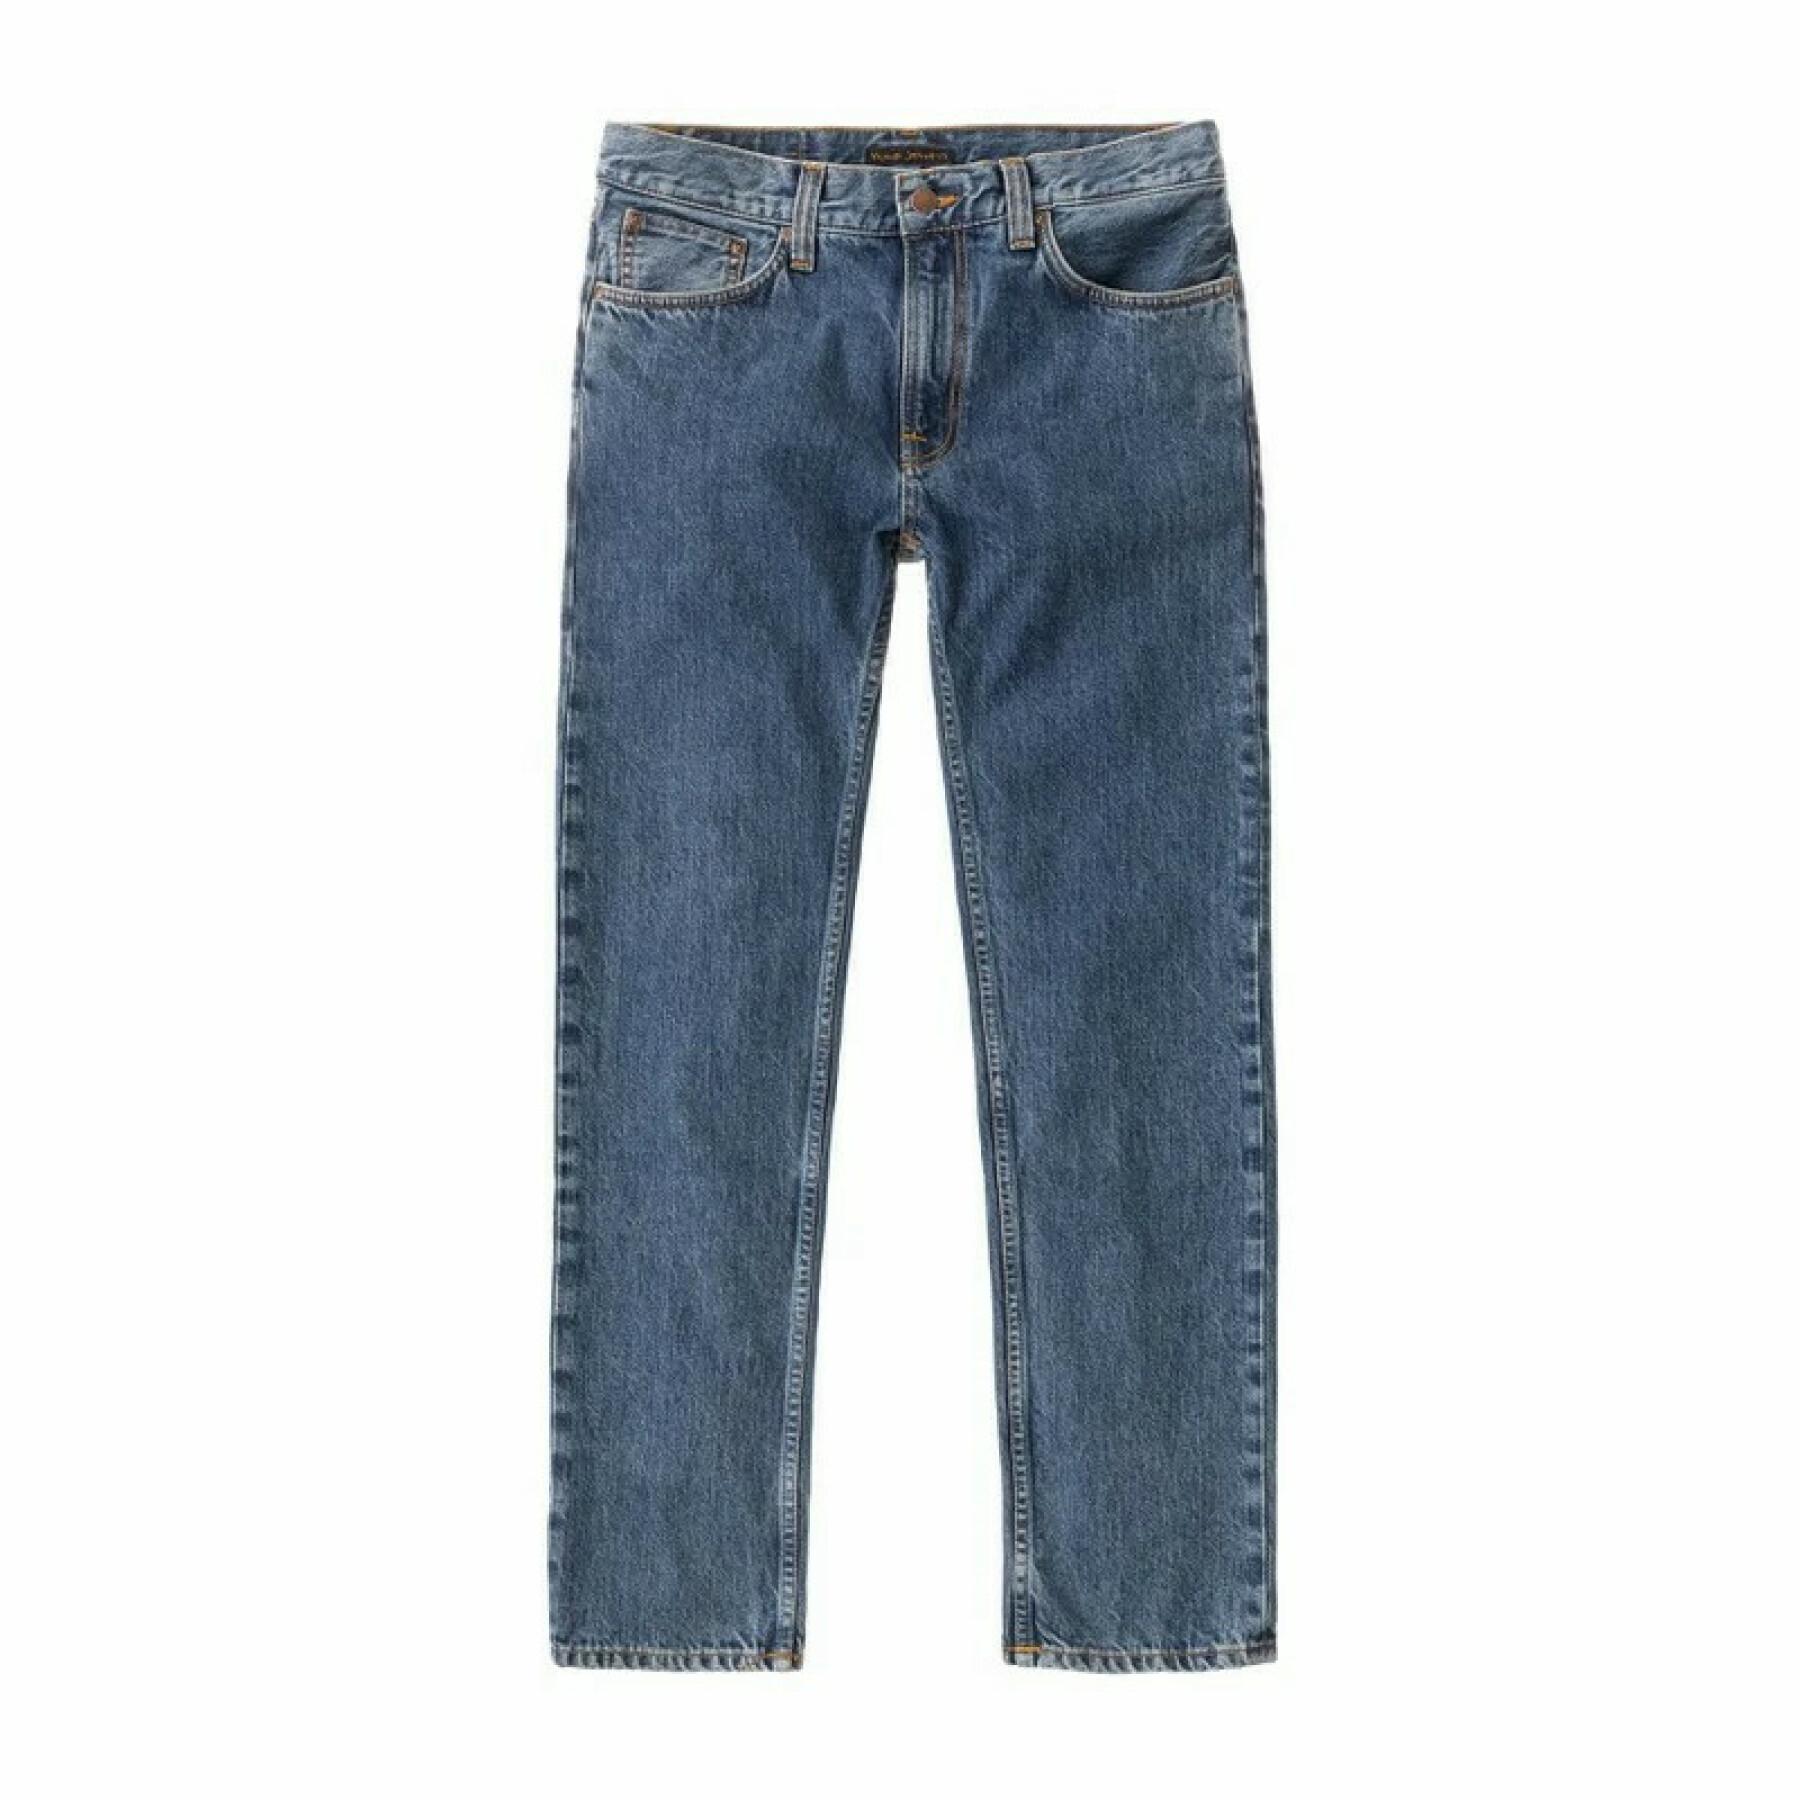 Jeans Nudie Jeans Gritty Jackson Friendly